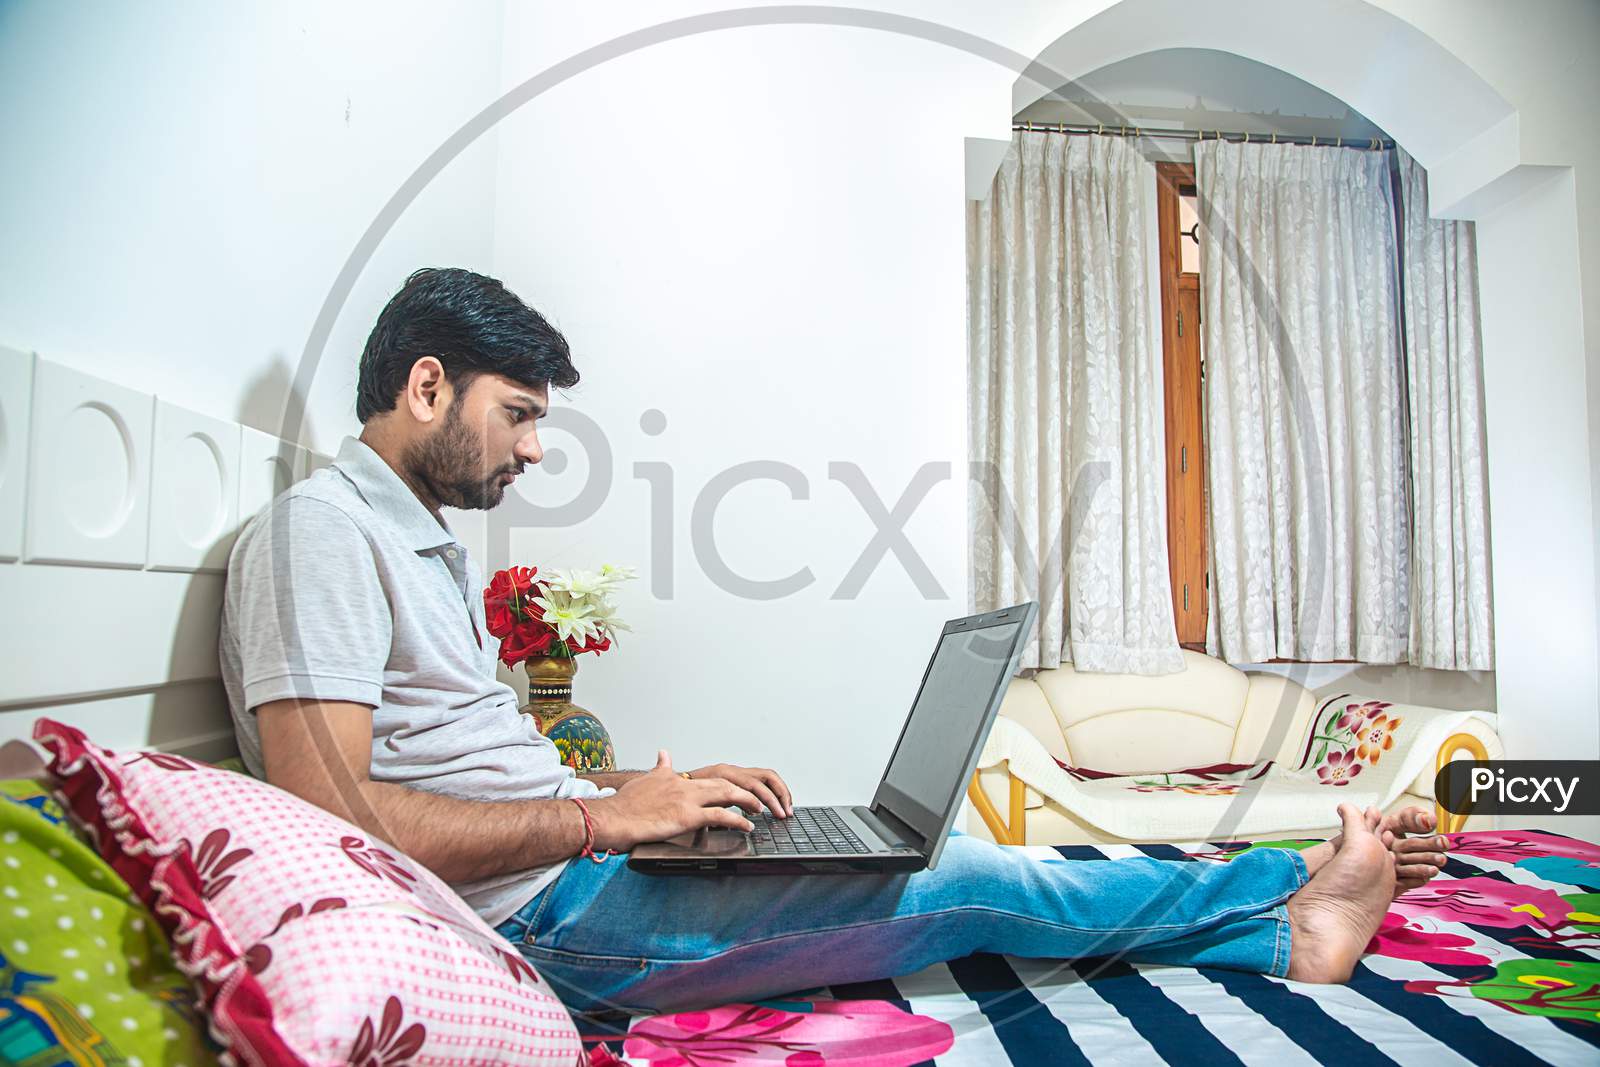 Young Indian Man Busy Working On His Computer Doing Office Work While Relaxing On Bed In Bedroom, Freelancer Working From Home. Young Male Quarantine Himself Coronavirus Outbreak Lock Down Concept.